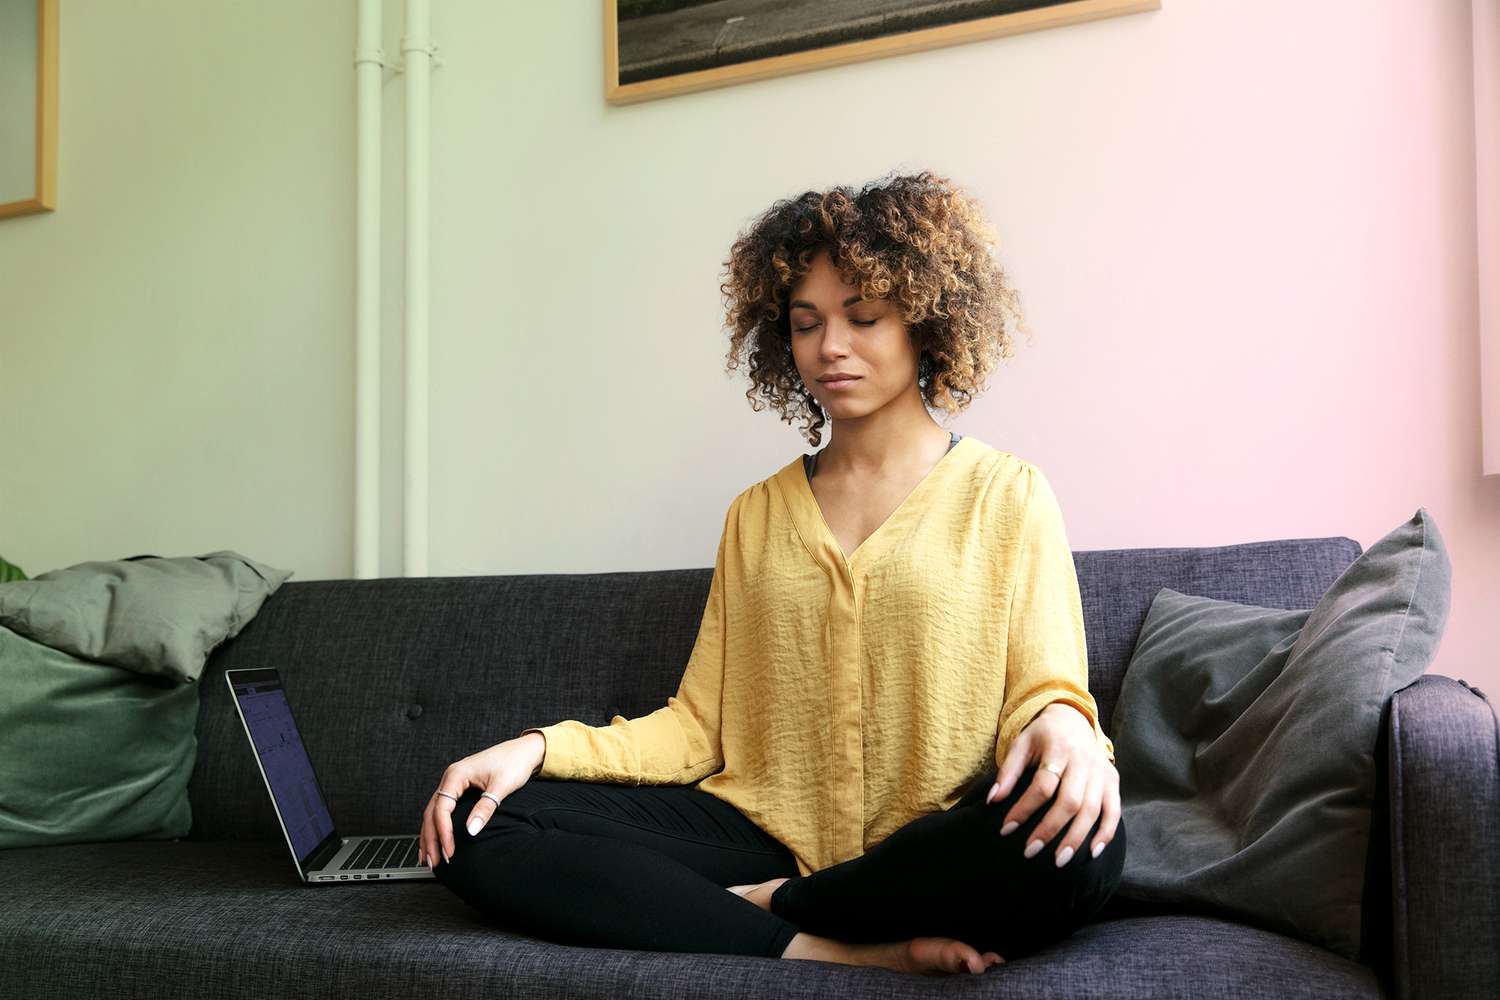 A woman sitting on a couch meditating